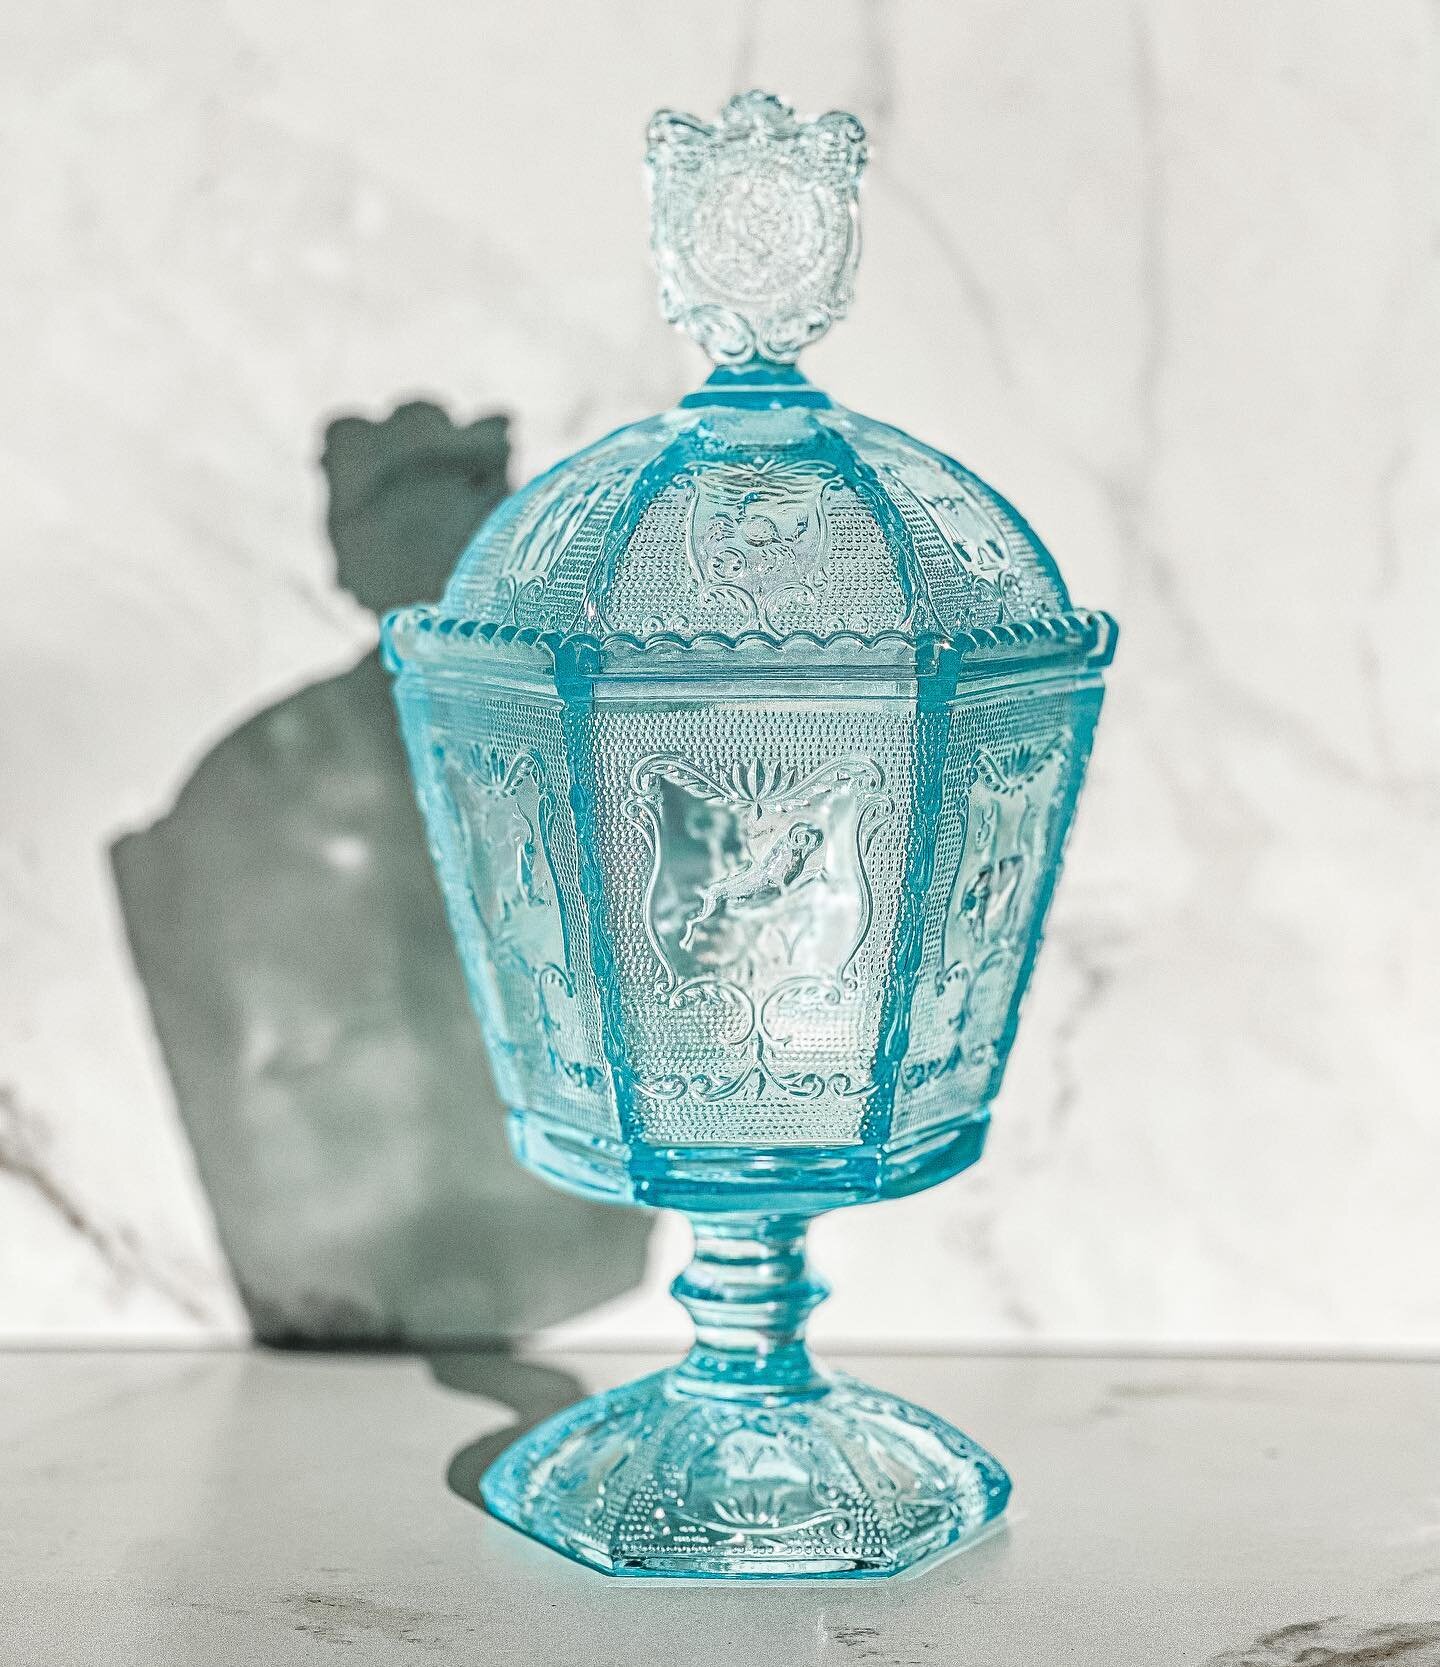 This beauty takes first place for my favorite find. 

1969-1971 &ldquo;Zodiac Azure Carnival&rdquo; Candy Dish by Imperial Glass

The hexagonal form features panels with each sign of the Zodiac surrounded by a finely stippled ground. It&rsquo;s truly